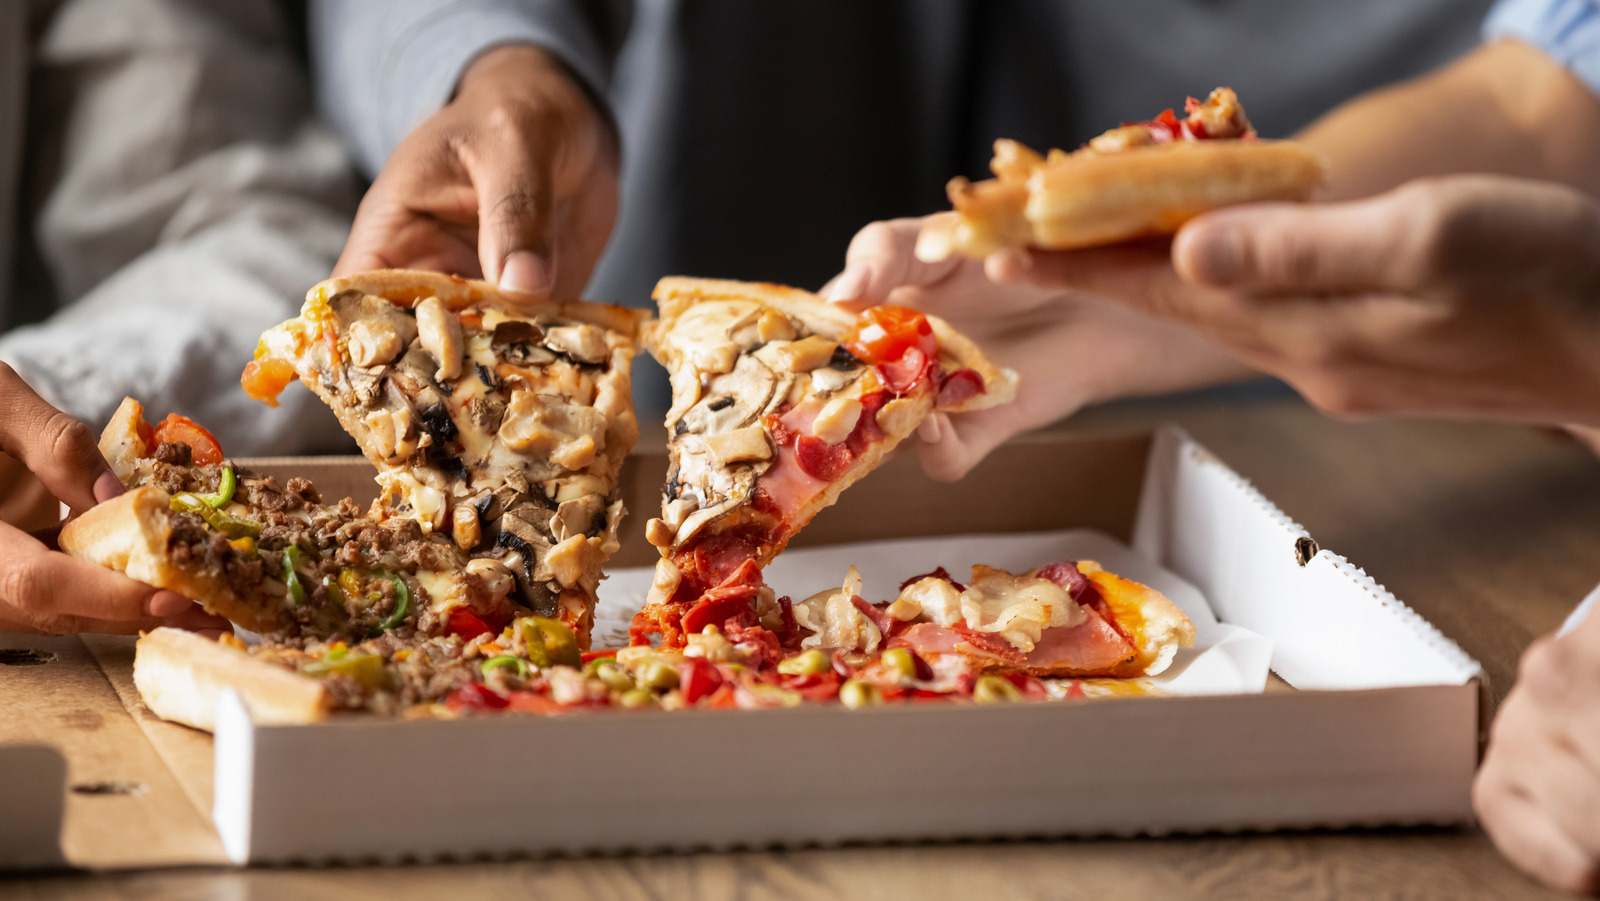 Fresh Hot Pizza Delivered I The Box. Take Away Concept Stock Photo